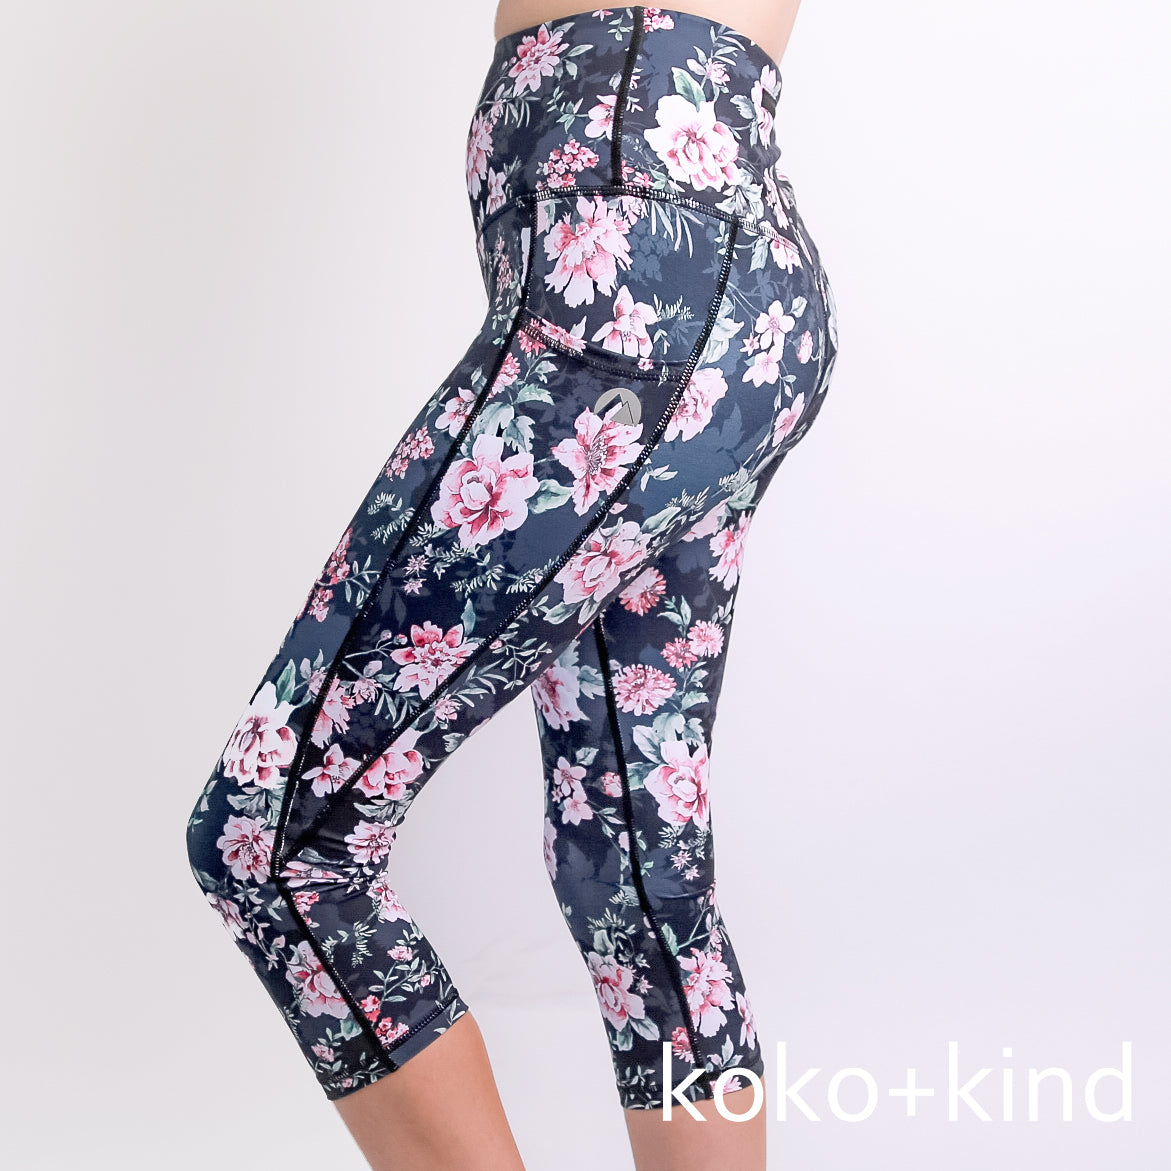 Intro. ❤️ love the fit Capri leggings. Size Large. Floral. Tummy Control. -  $20 - From Jill